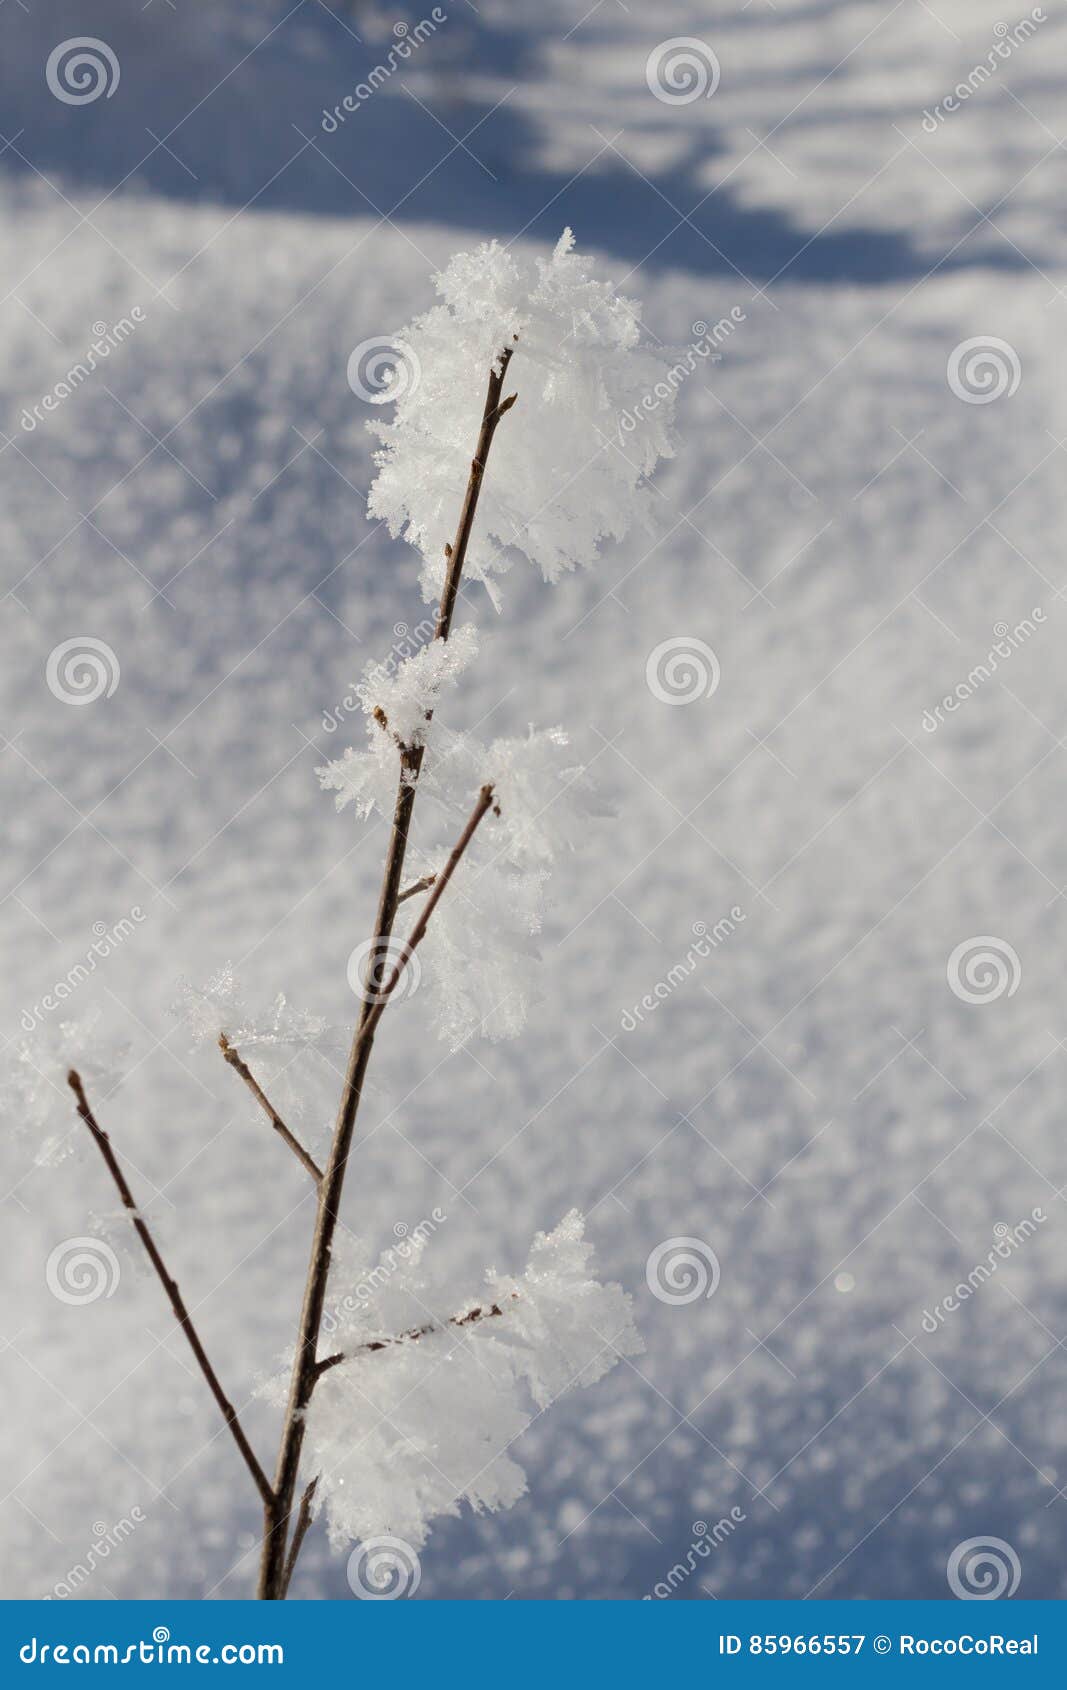 Snow Crystals on Tree Branches Stock Image - Image of macro, cold: 85966557